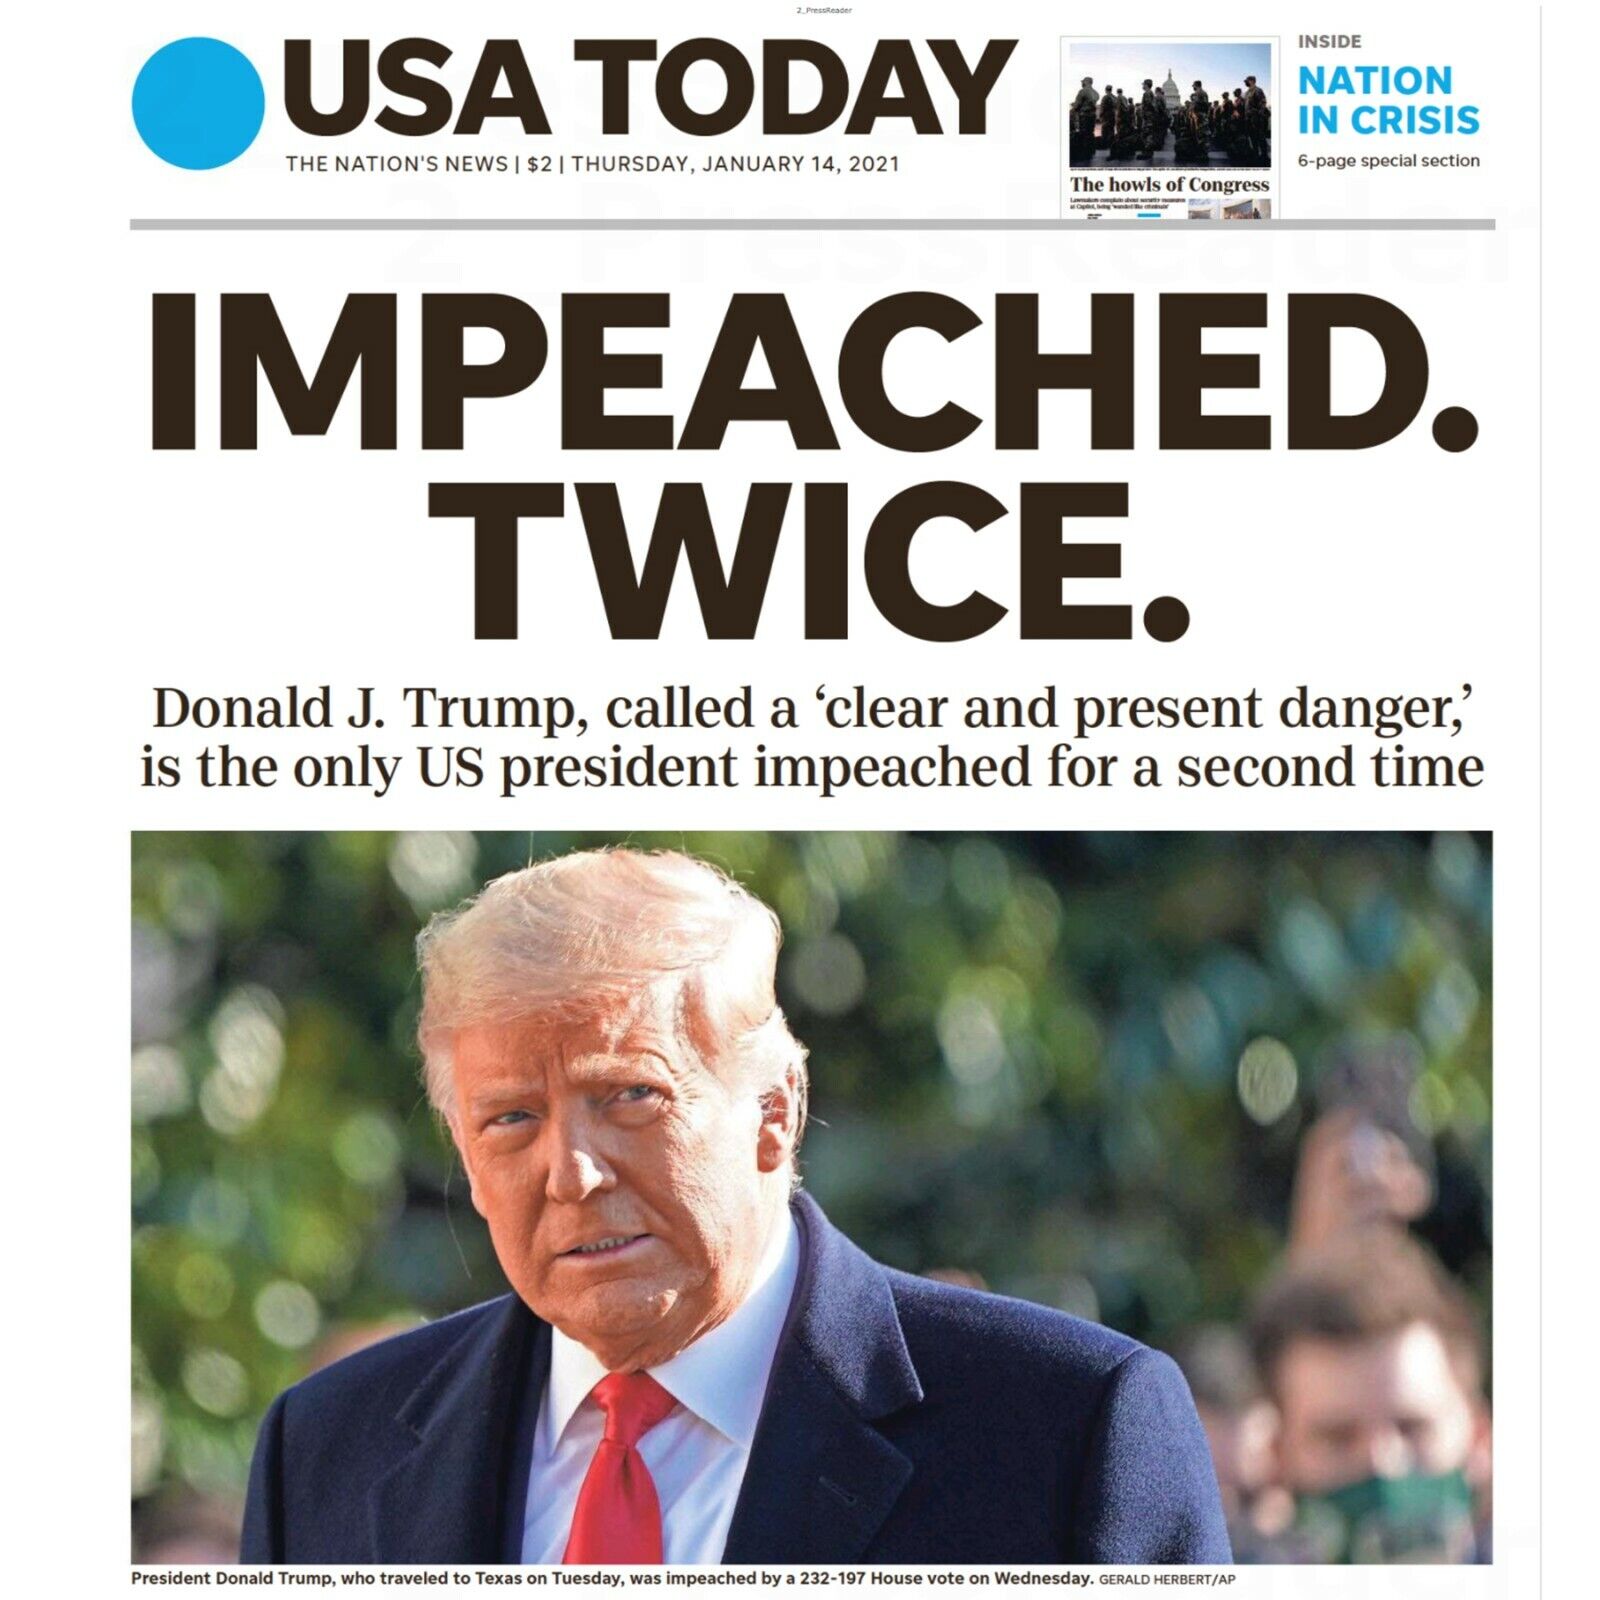 USA TODAY NEWSPAPER THURSDAY JANUARY 14, 2021 DONALD TRUMP IMPEACHED TWICE